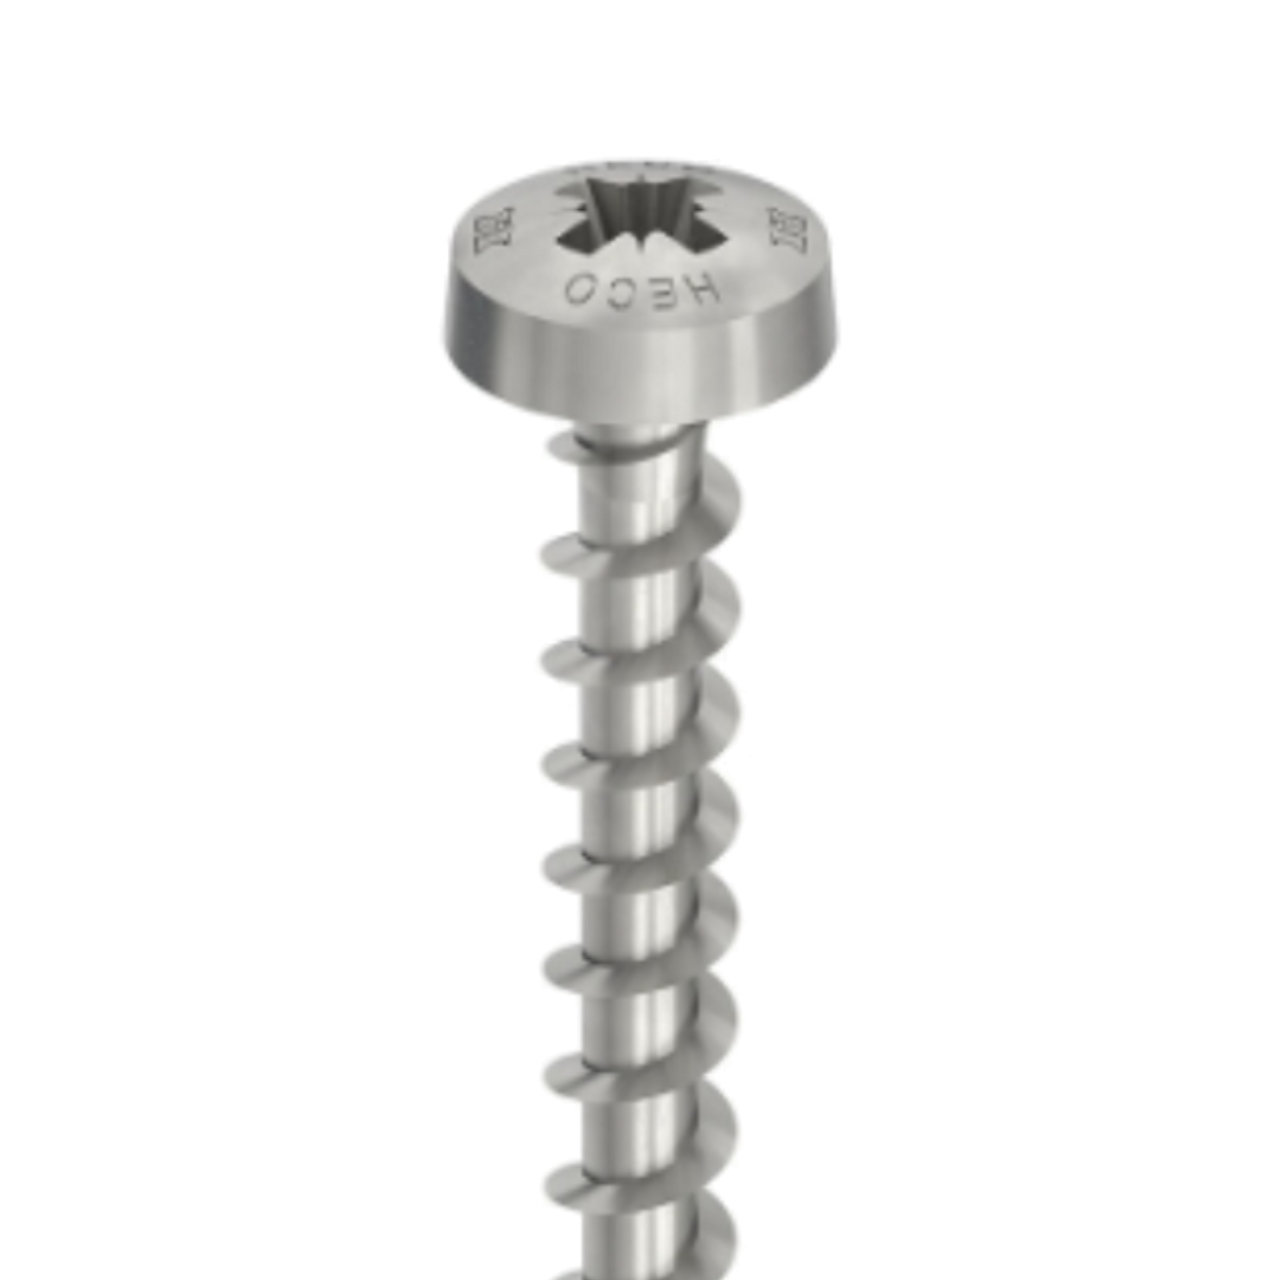 HECO Pan Head Screws | 5mm A2 304 Stainless Steel Full Thread with PZ Drive for Timber to Steel Connection, Outdoor Screws in Brisbane, Sydney and Melbourne.